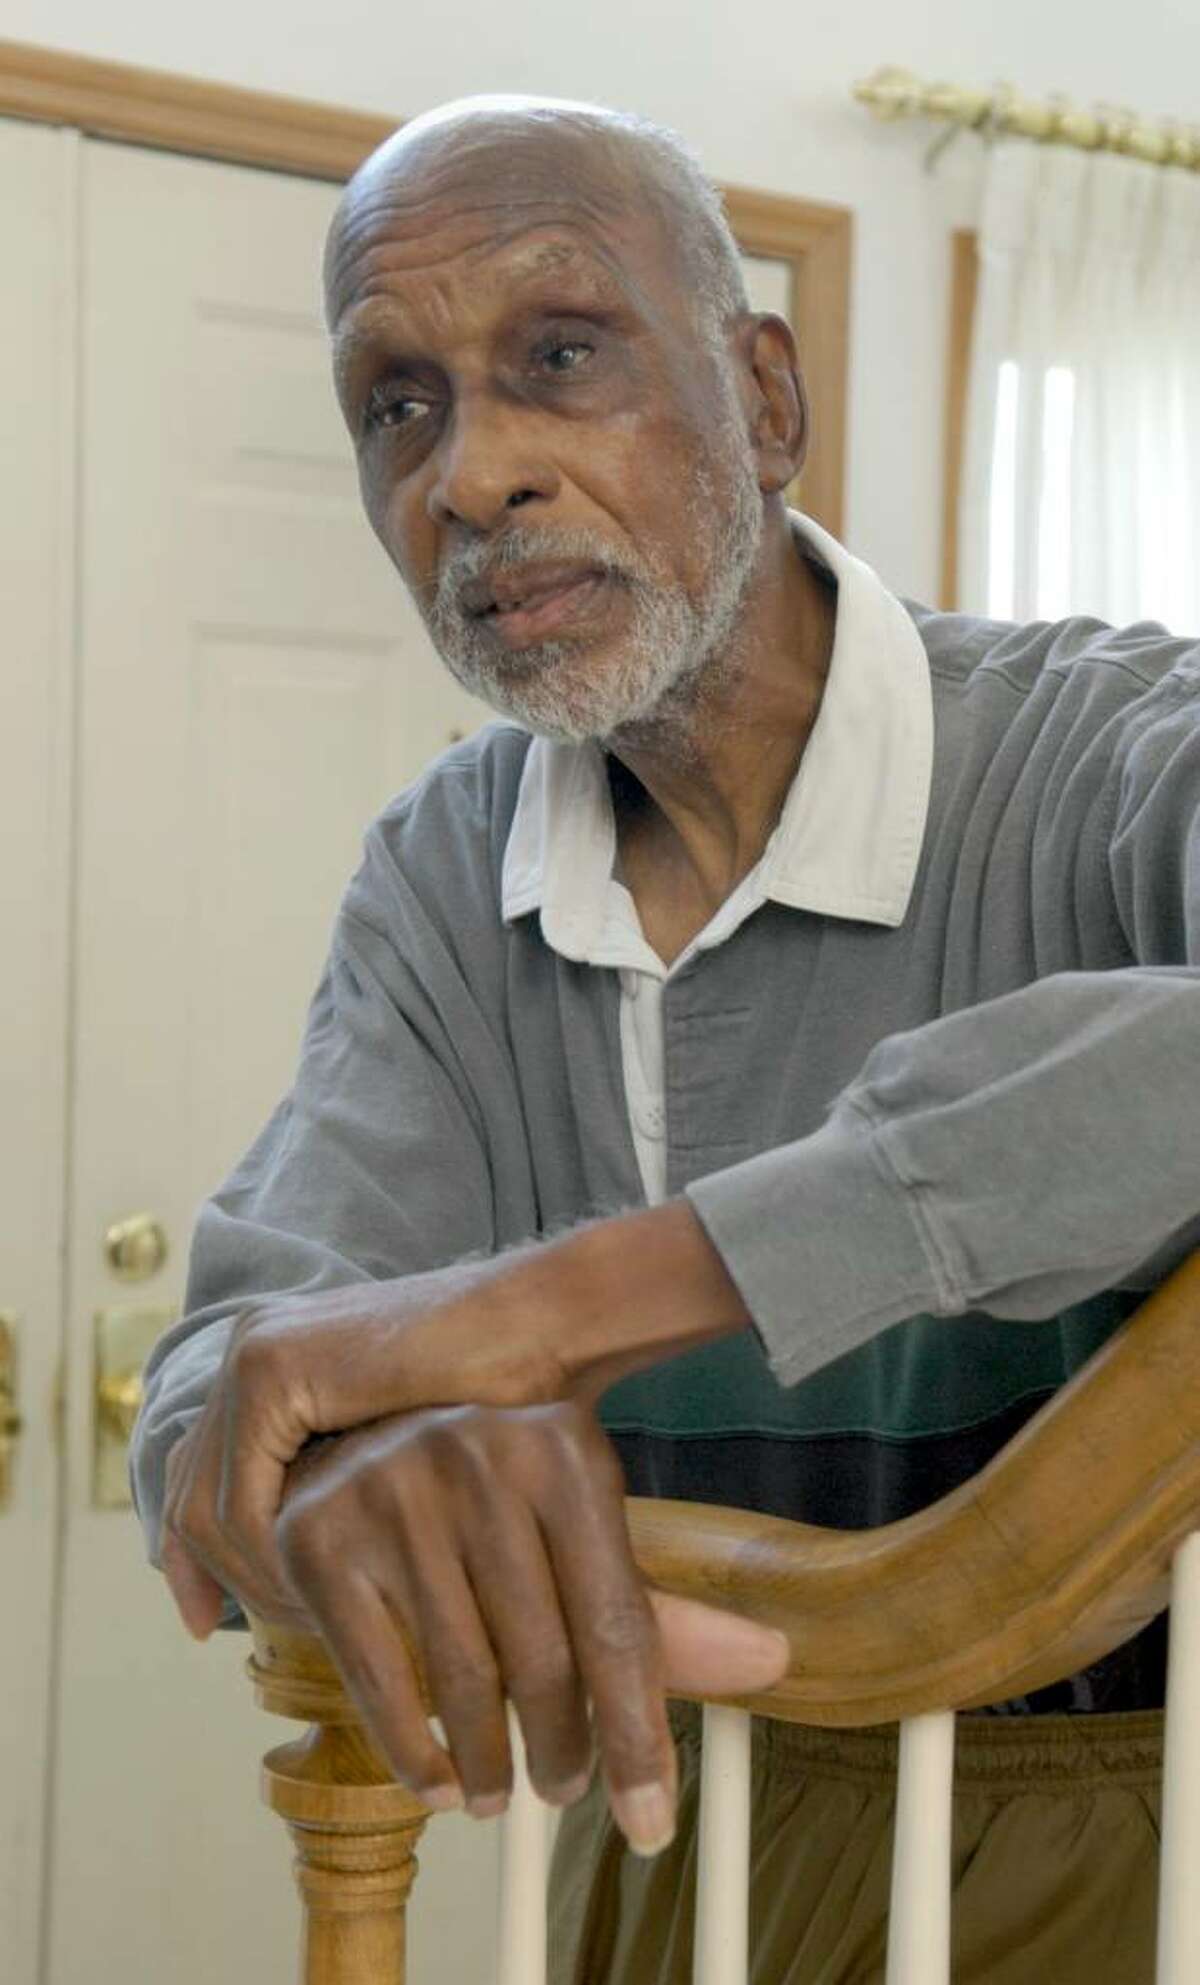 Herbert Wright, who just turned 82, is a former Civil Rights leader and a high-profile member of the NAACP. He is a resident who will be featured Friday night at "A Night of Gospel Music" at Victory Christain Center in Danbury.